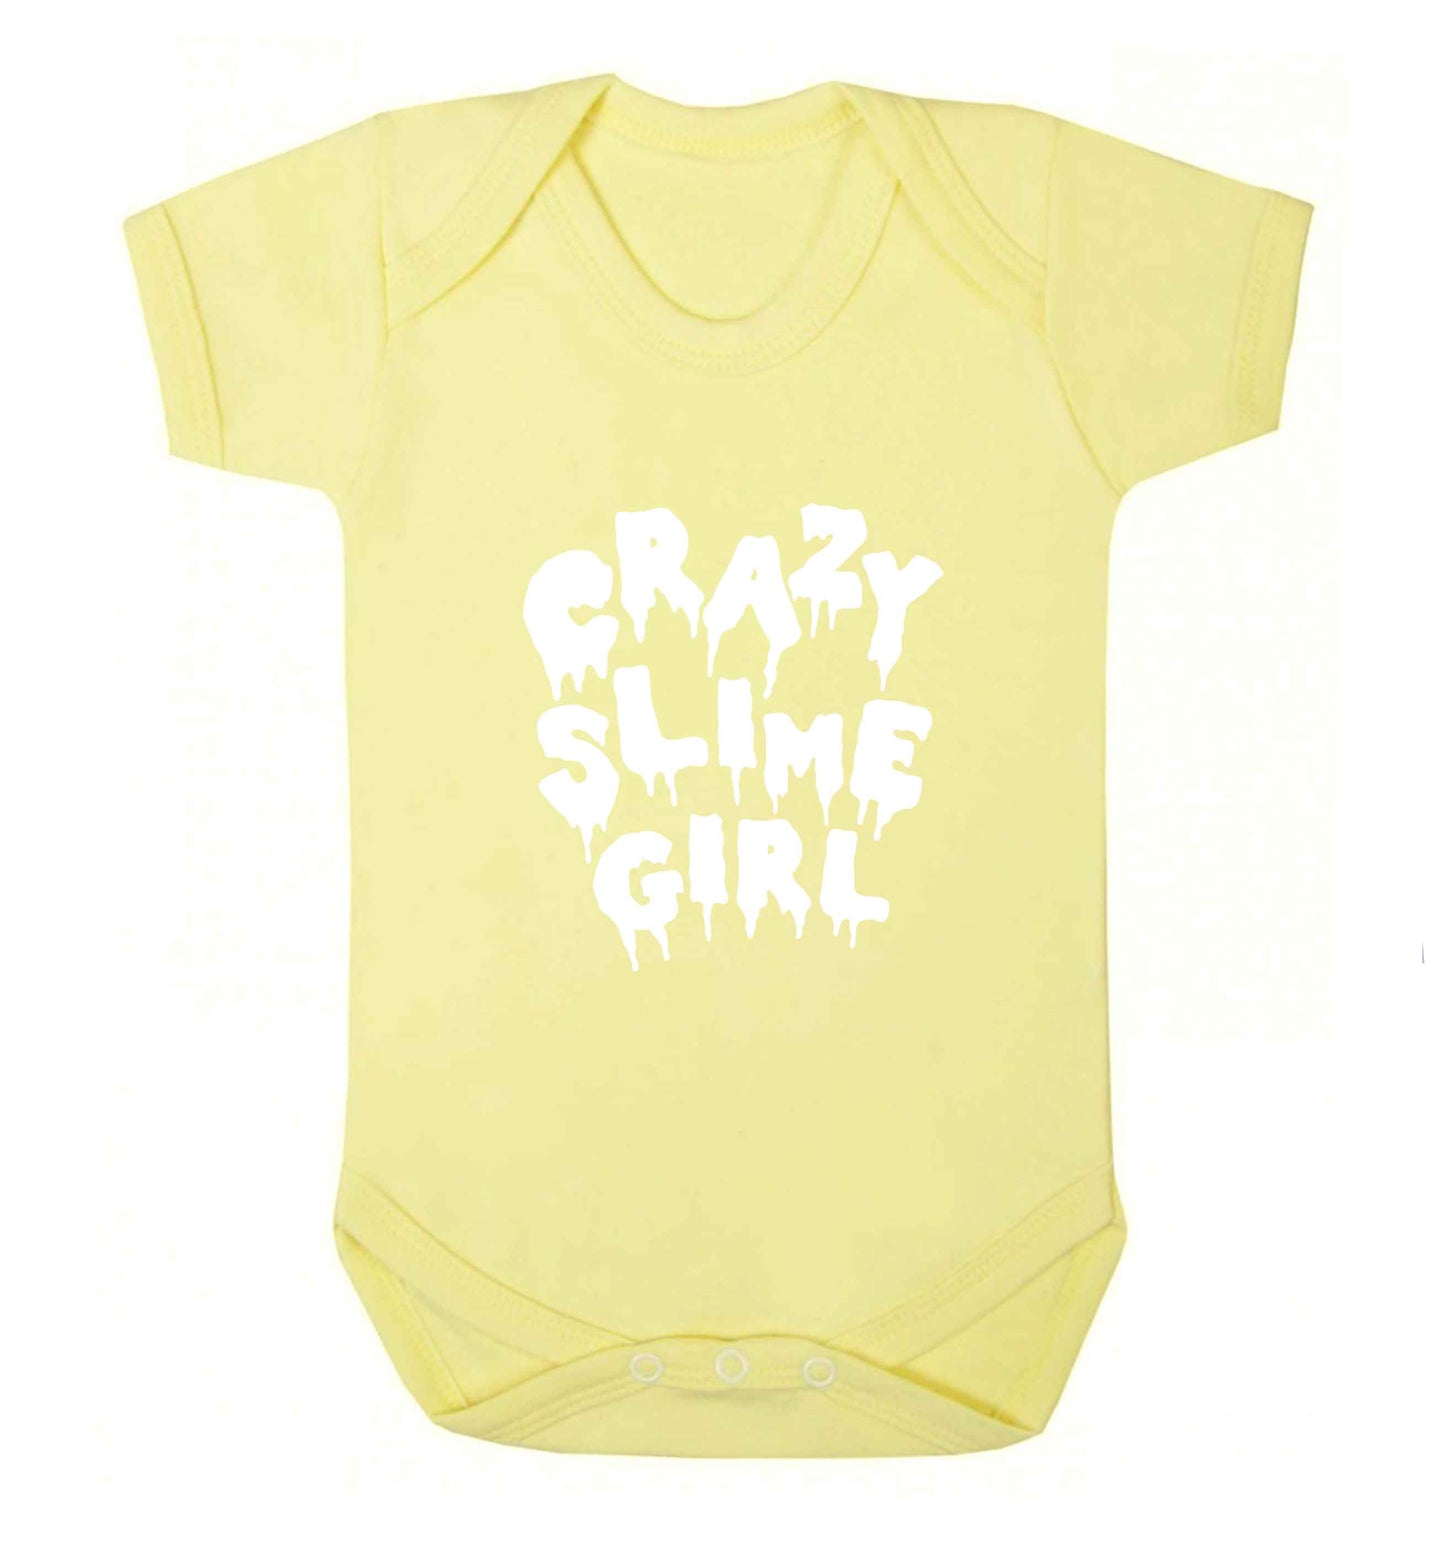 Crazy slime girl baby vest pale yellow 18-24 months